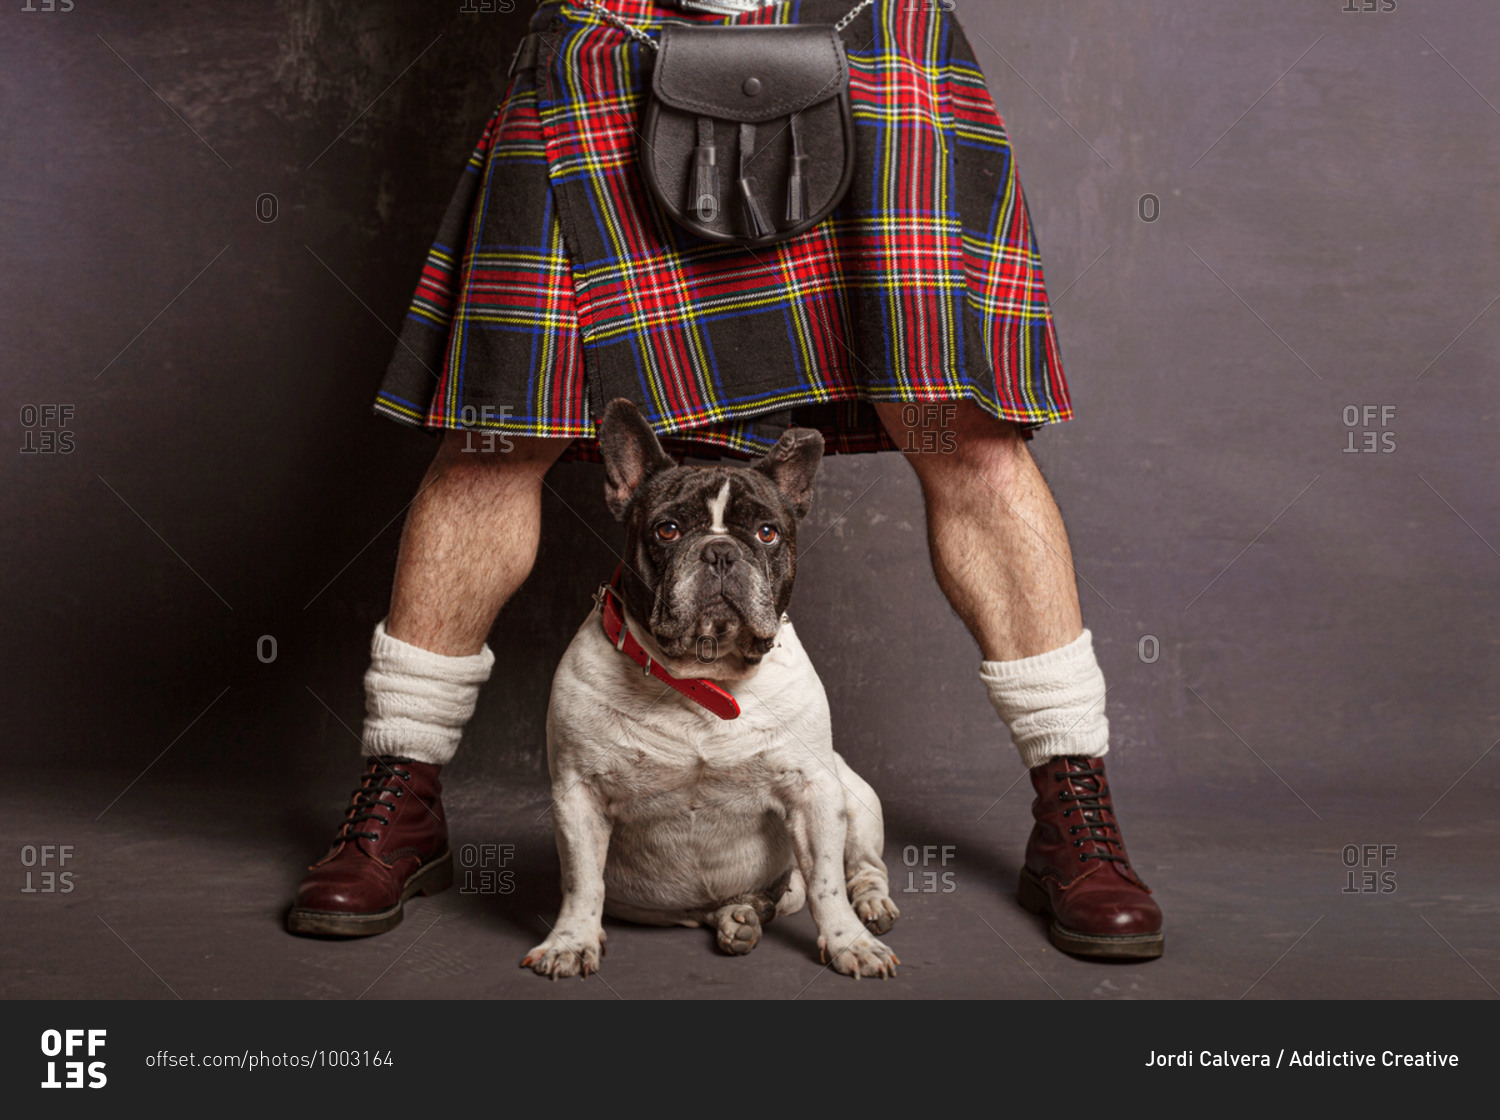 Crop anonymous man in Scottish skirt and leather boots with leather shoulder bag standing with legs apart near cute French Bulldog in red collar